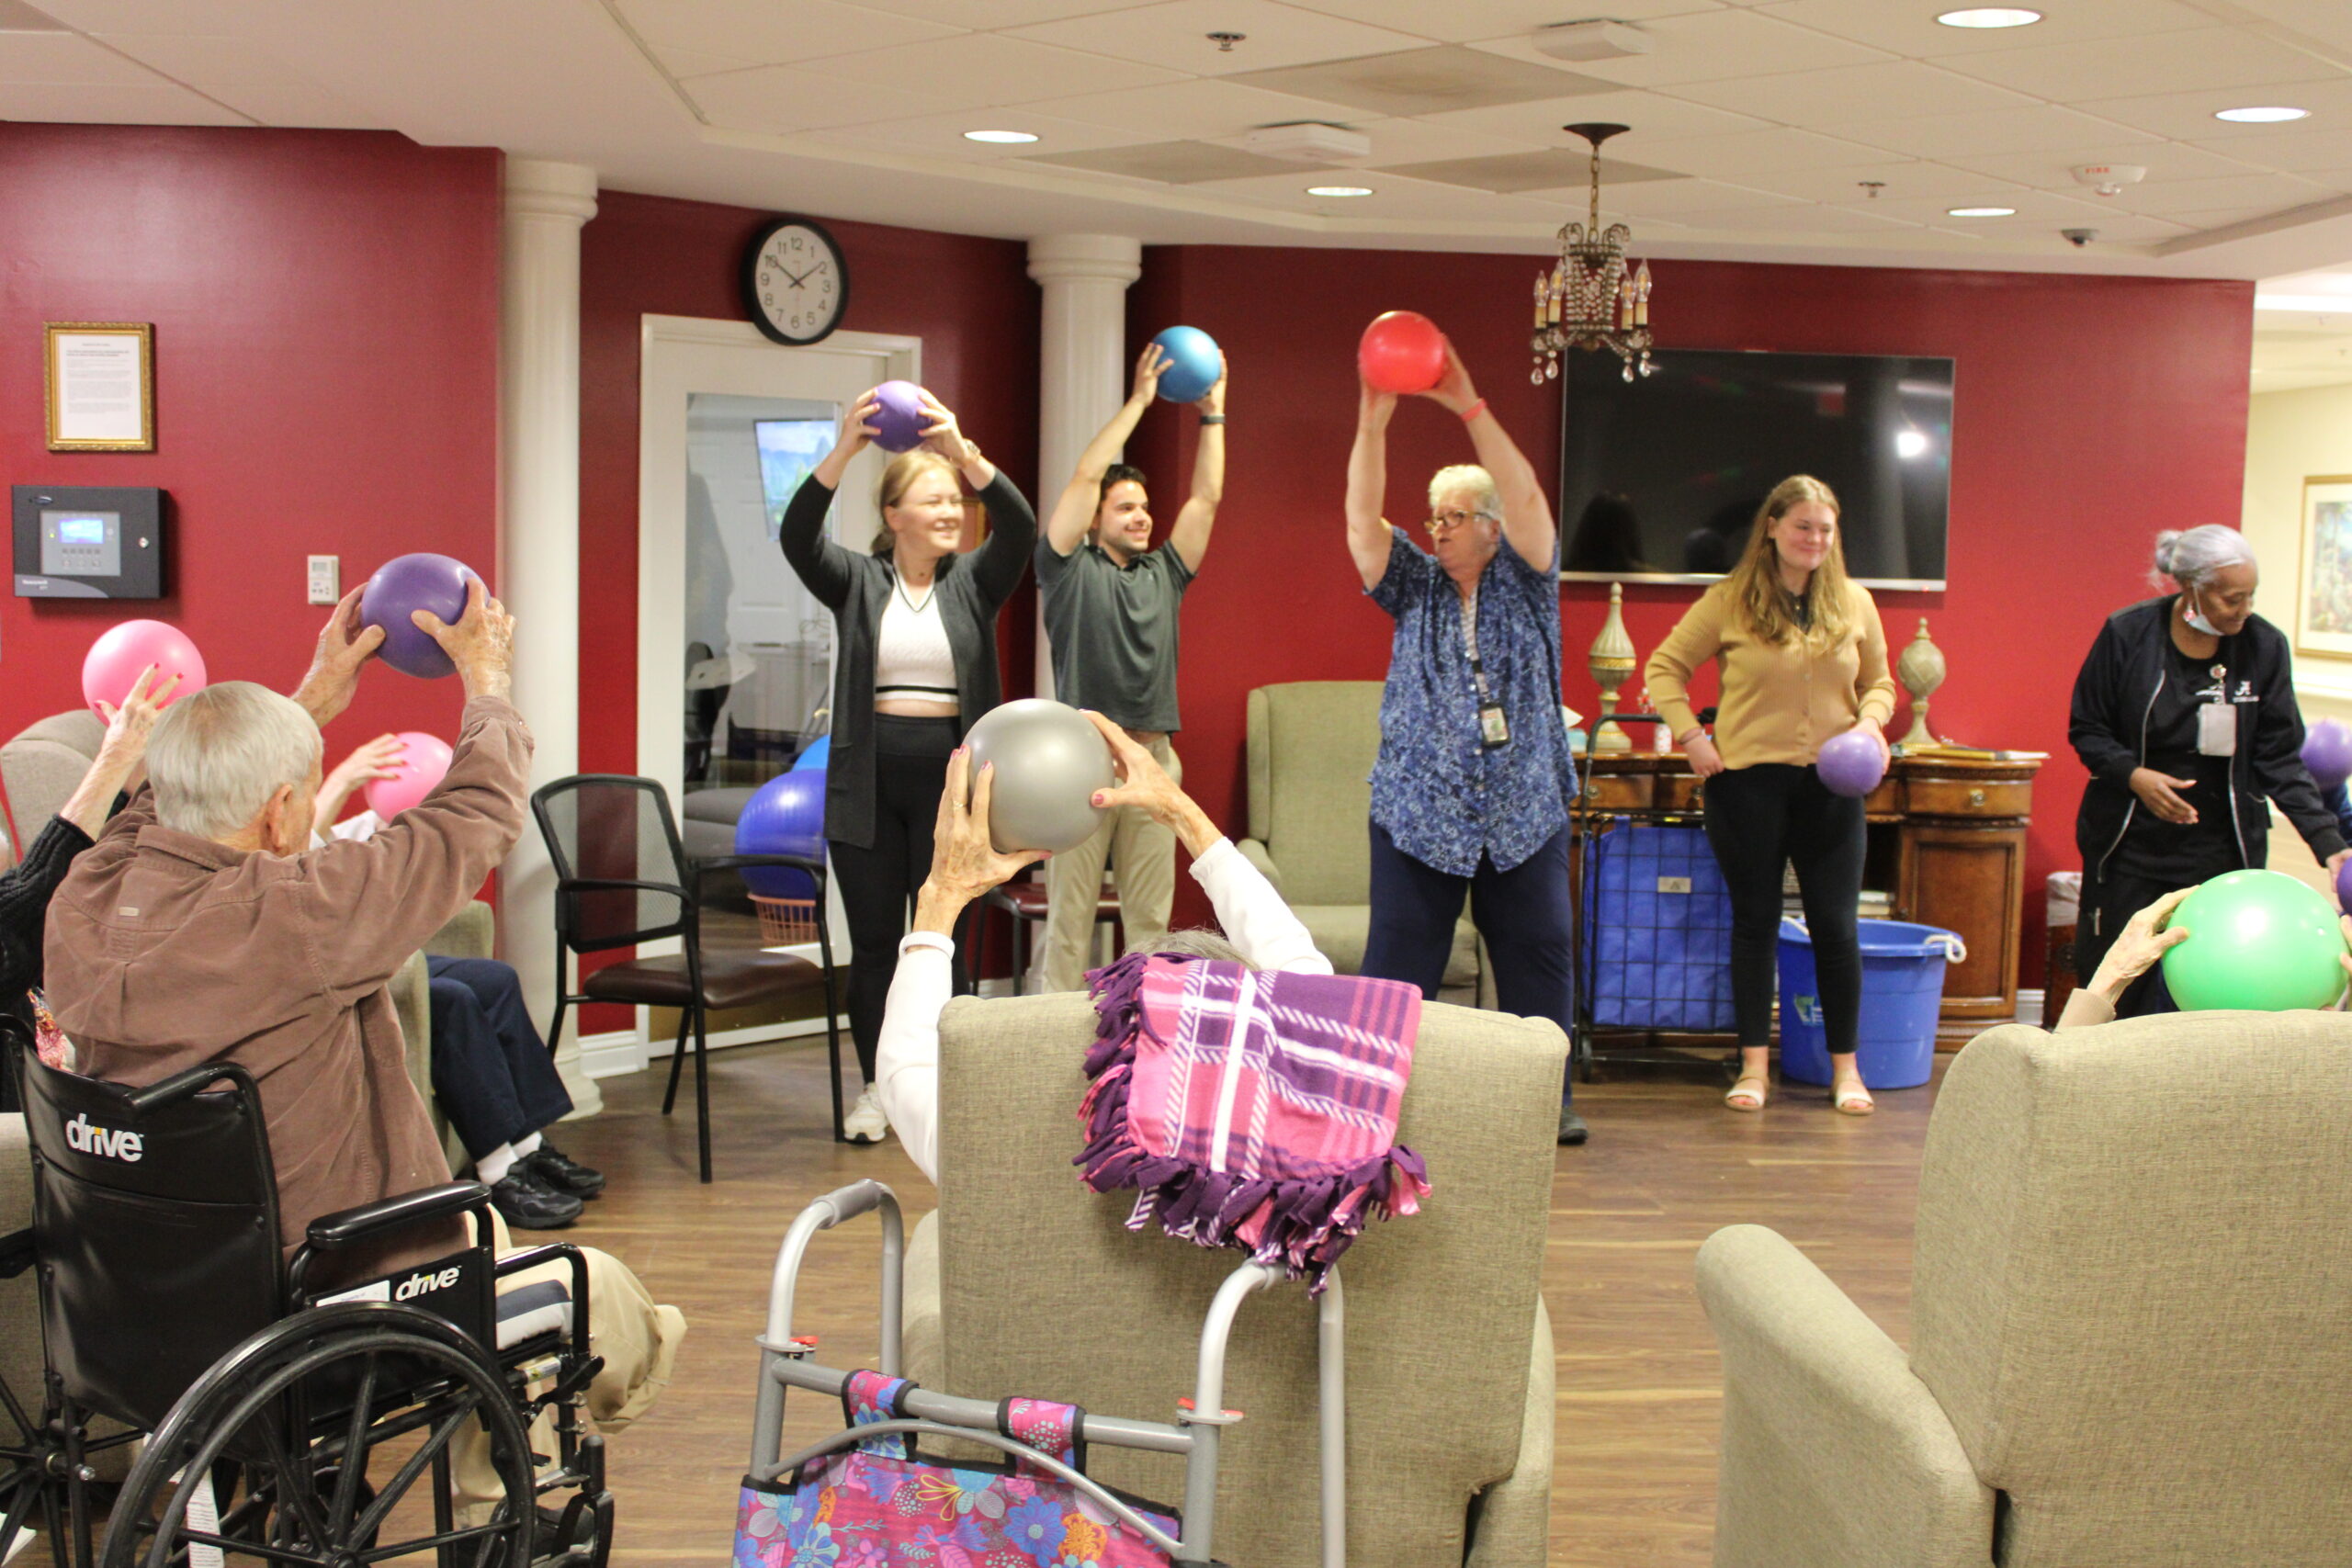 UA Students join the Resident Services Director playing games with Traditions Way residents